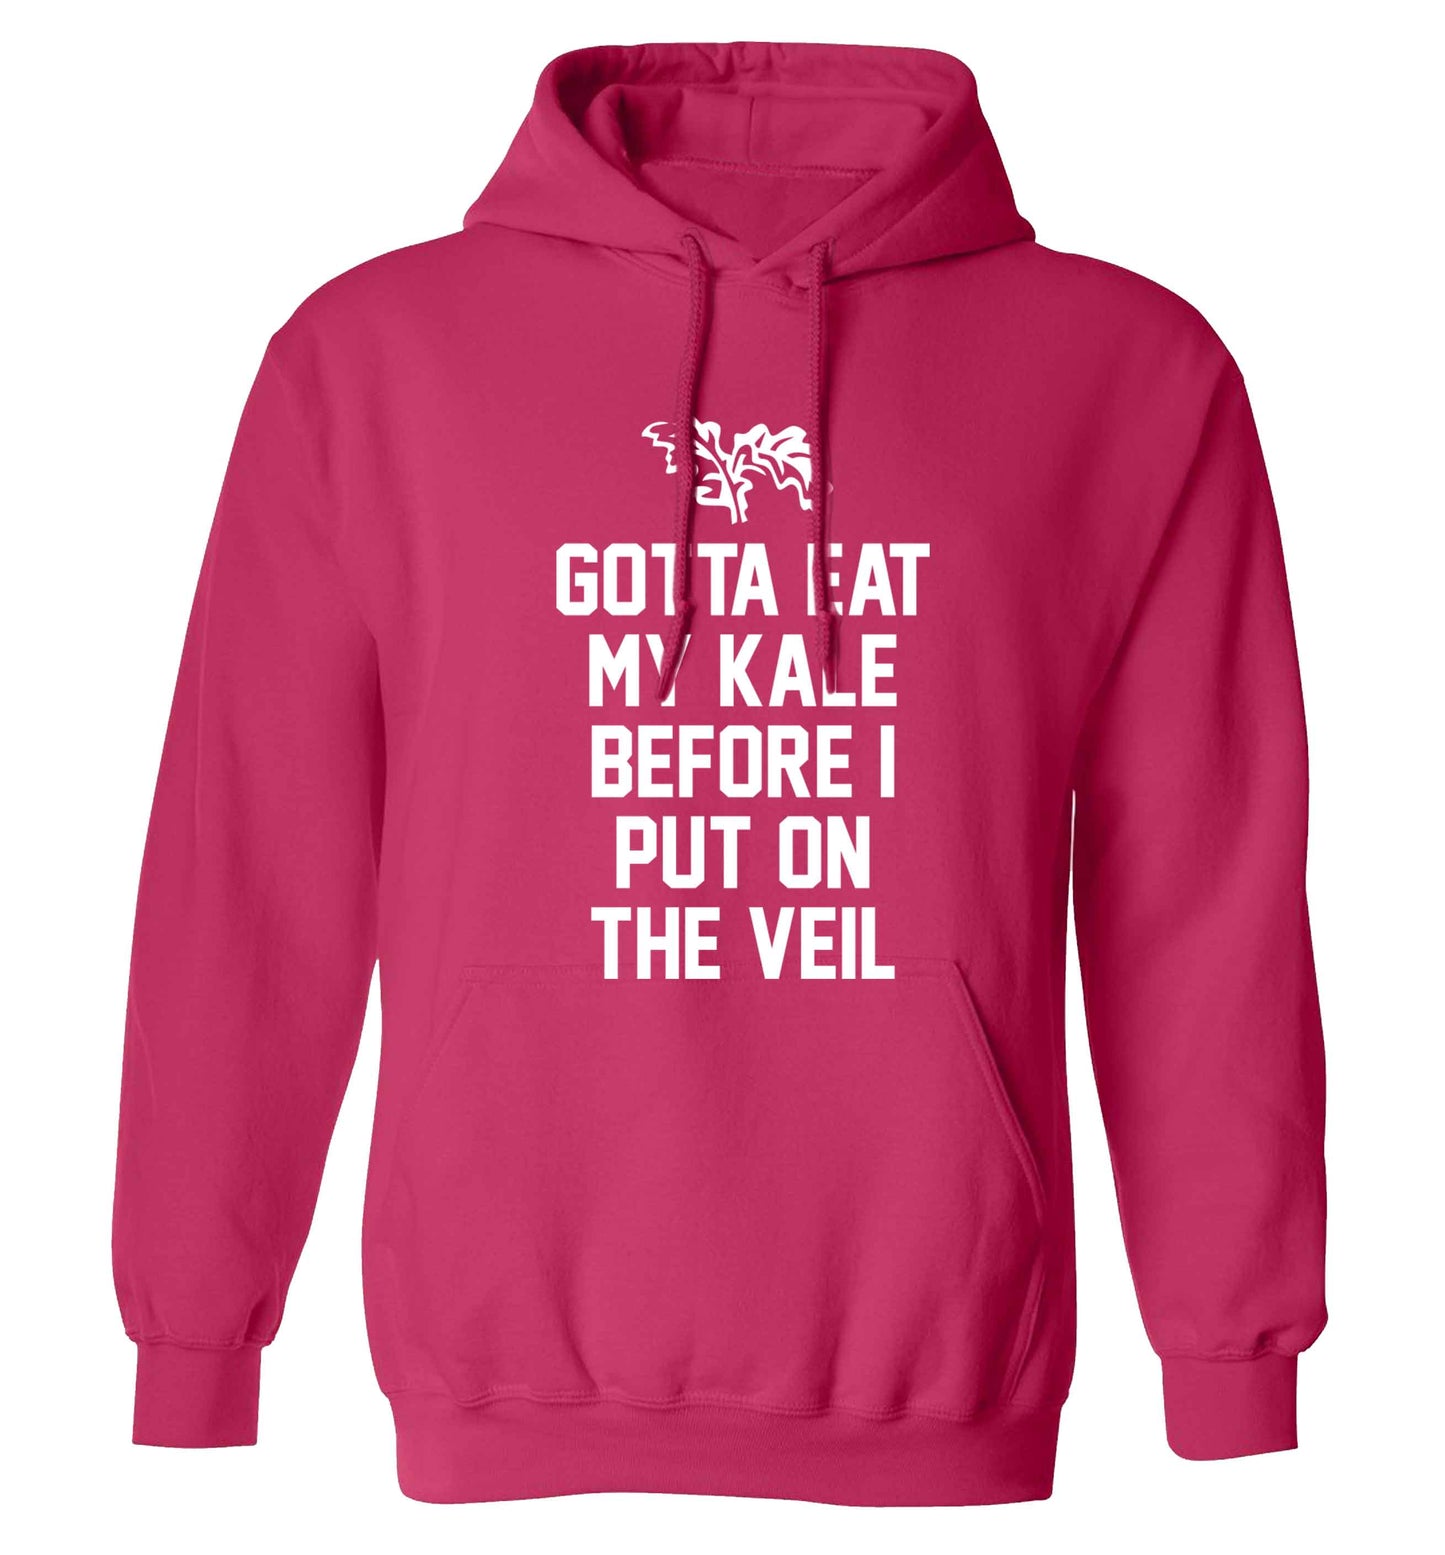 Gotta eat my kale before I put on the veil adults unisex pink hoodie 2XL